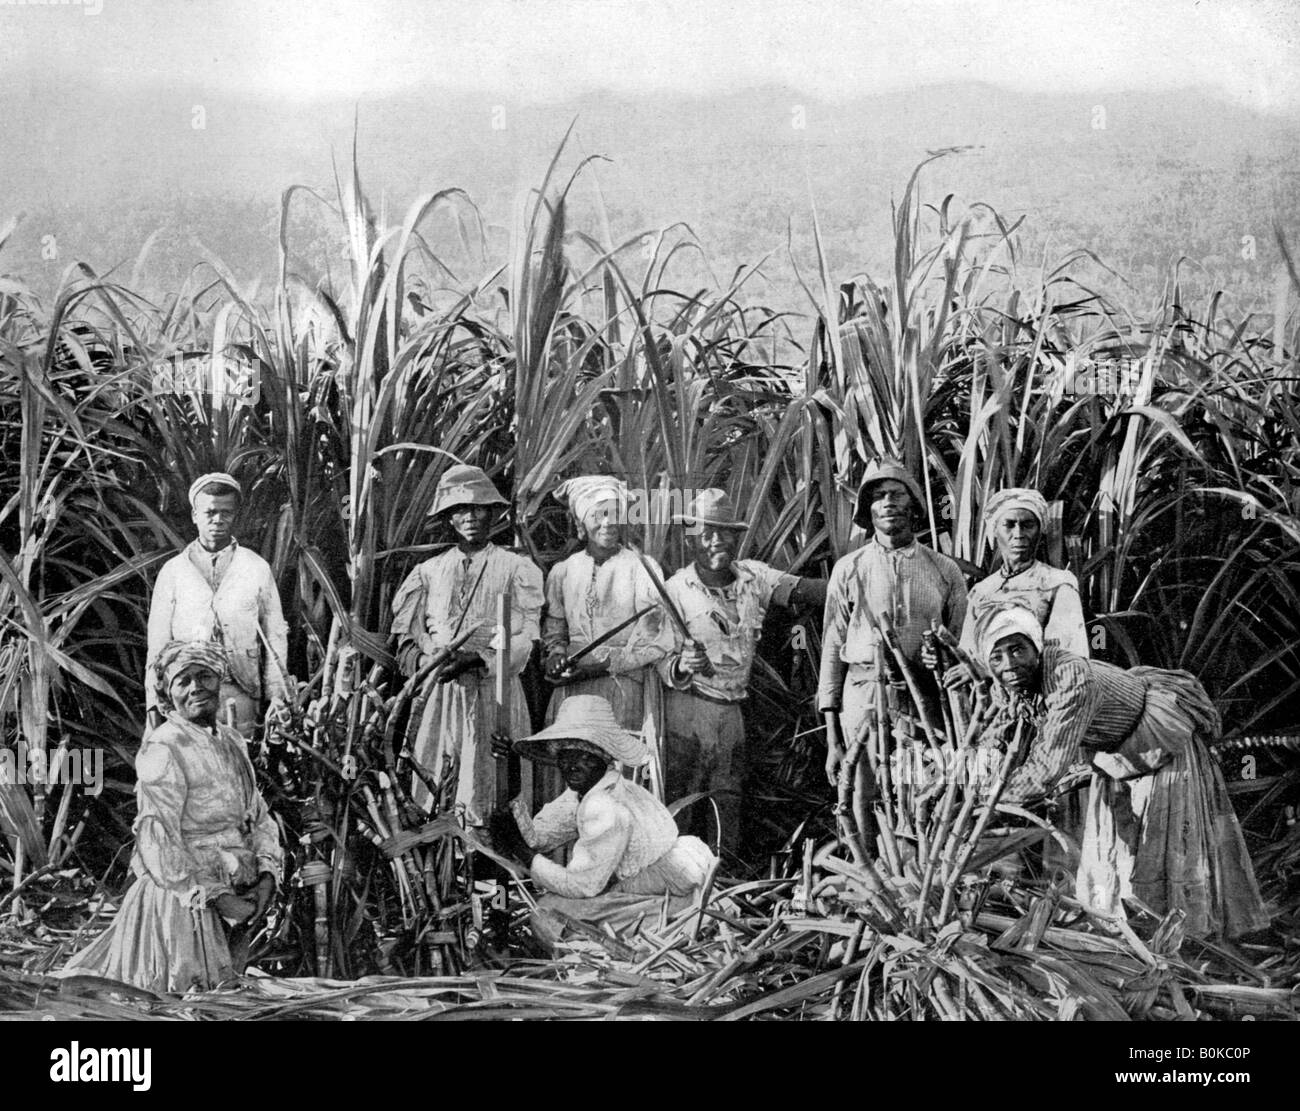 Sugar cane cutters, Jamaica, c1905.Artist: Adolphe Duperly & Son Stock Photo